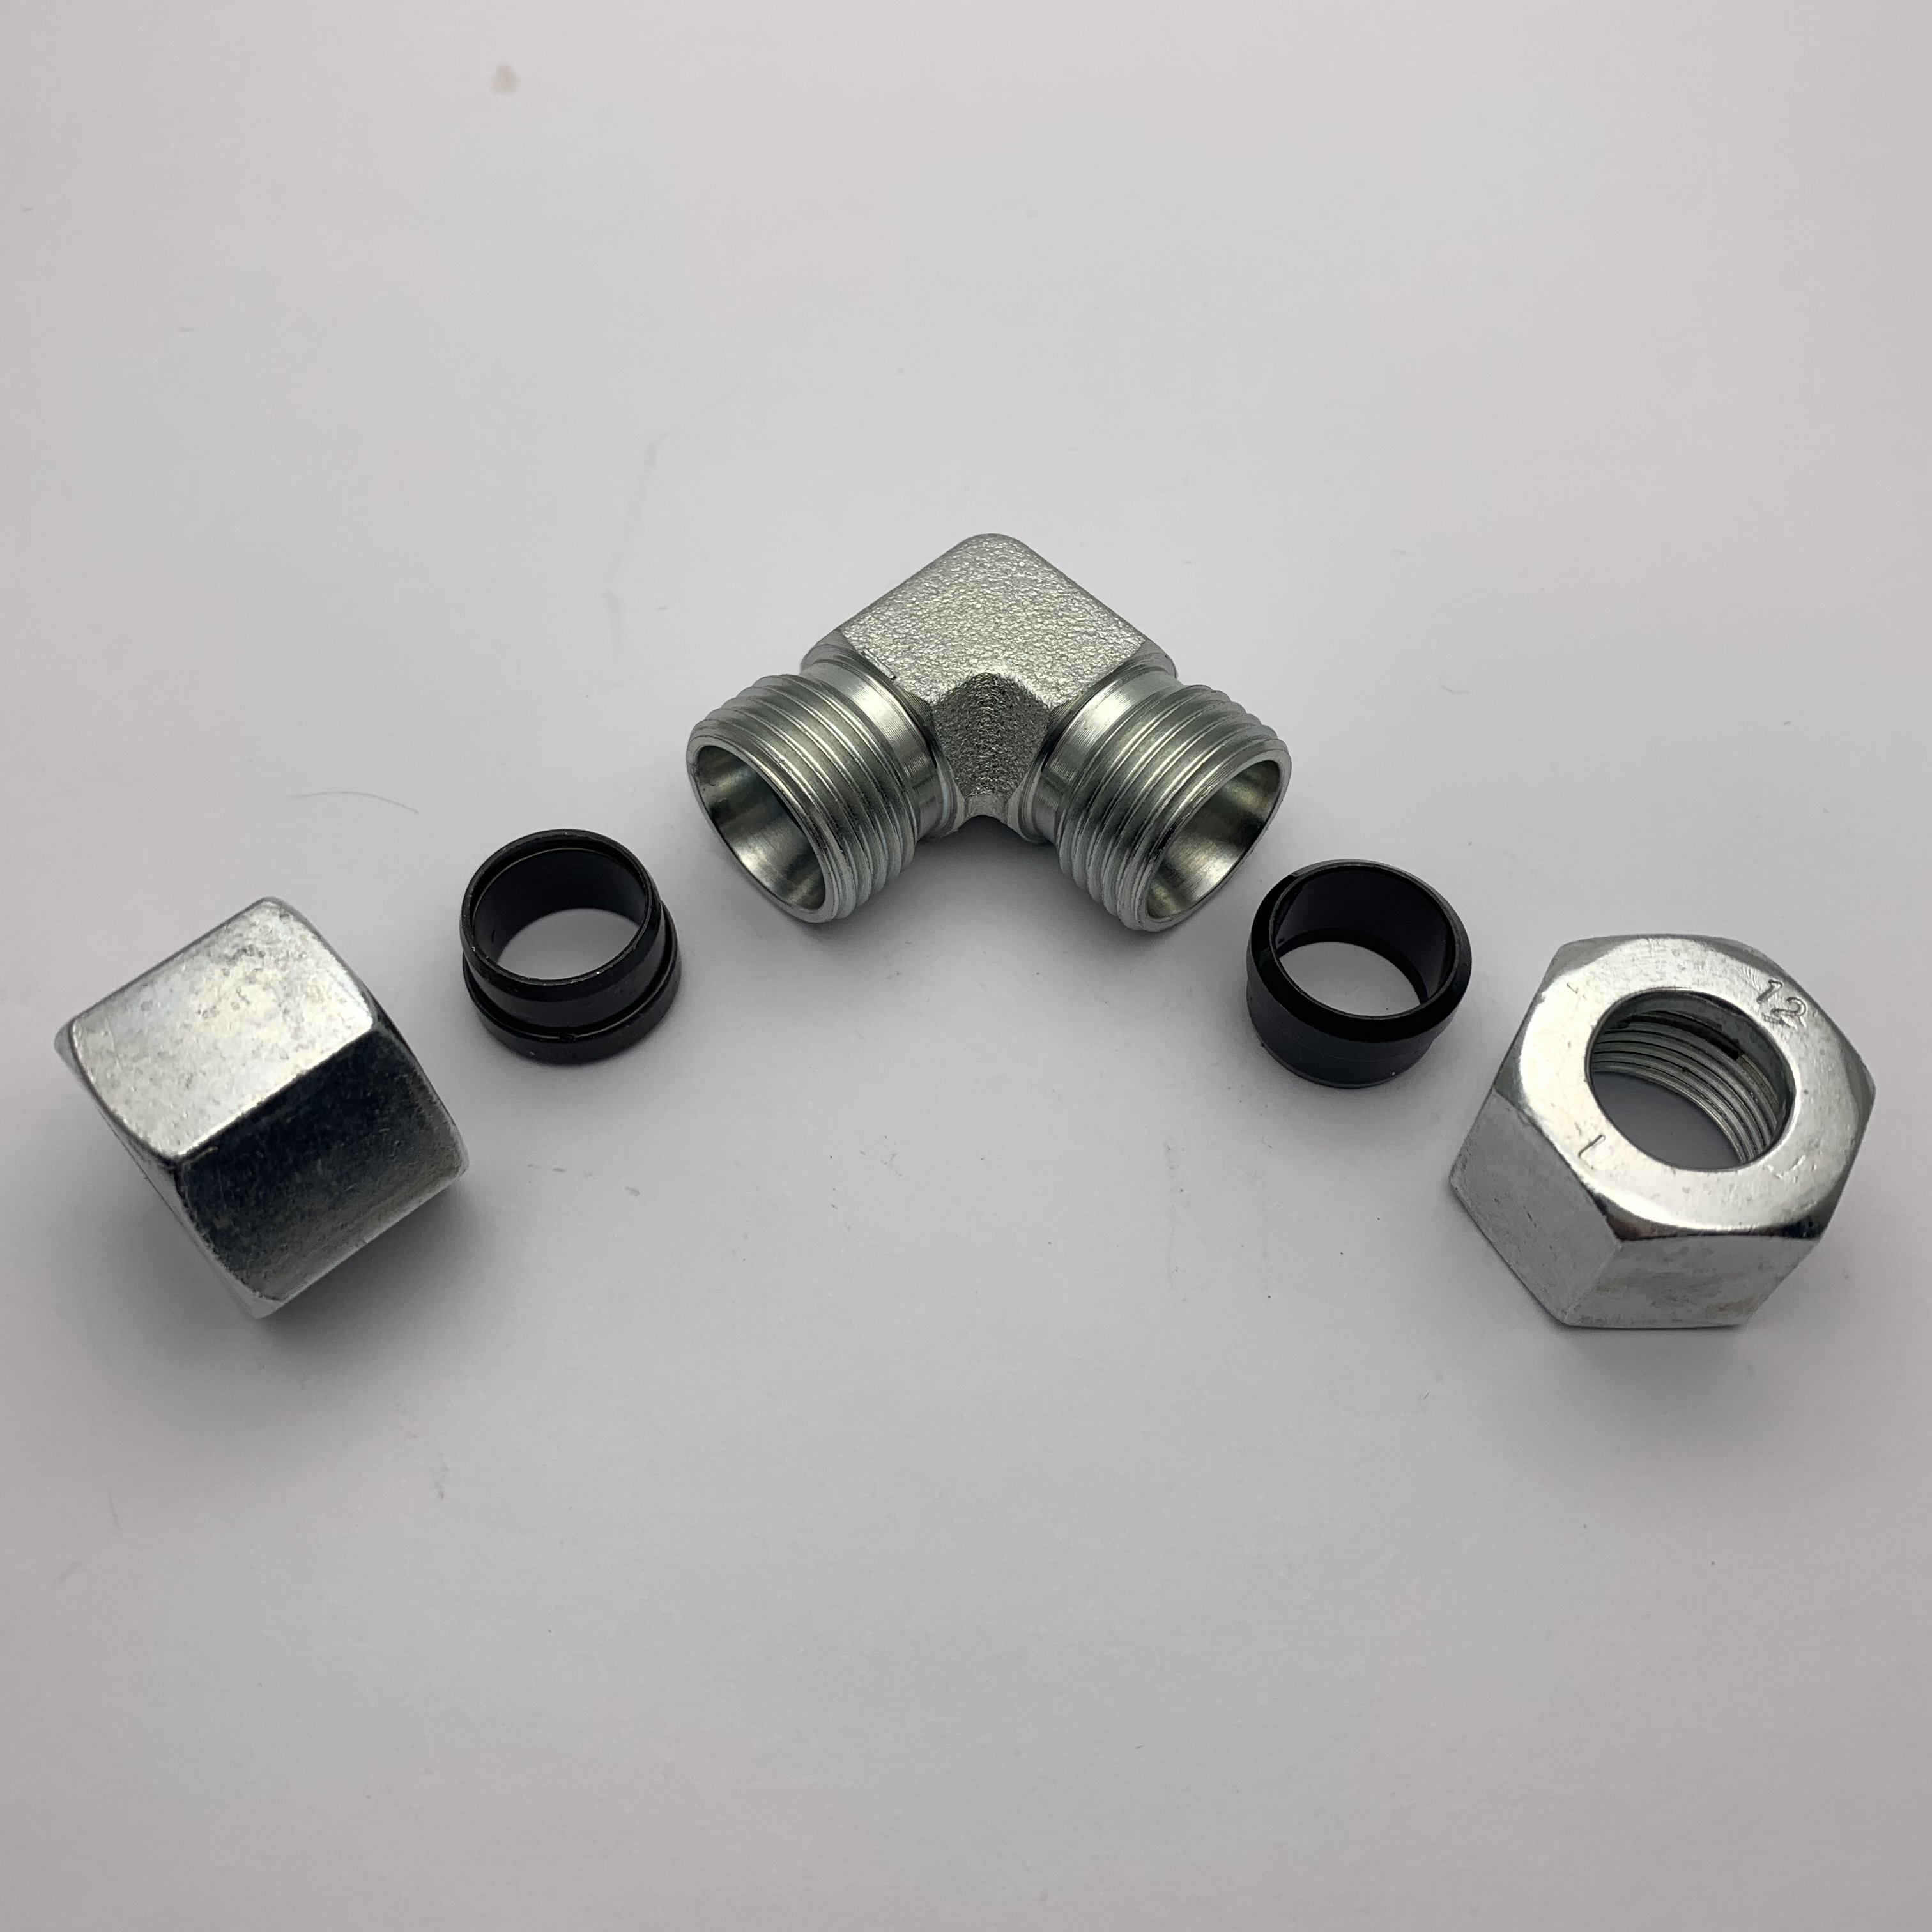 1C9 90°METRIC MALE 24°Light Type Elbow Fittings Producer